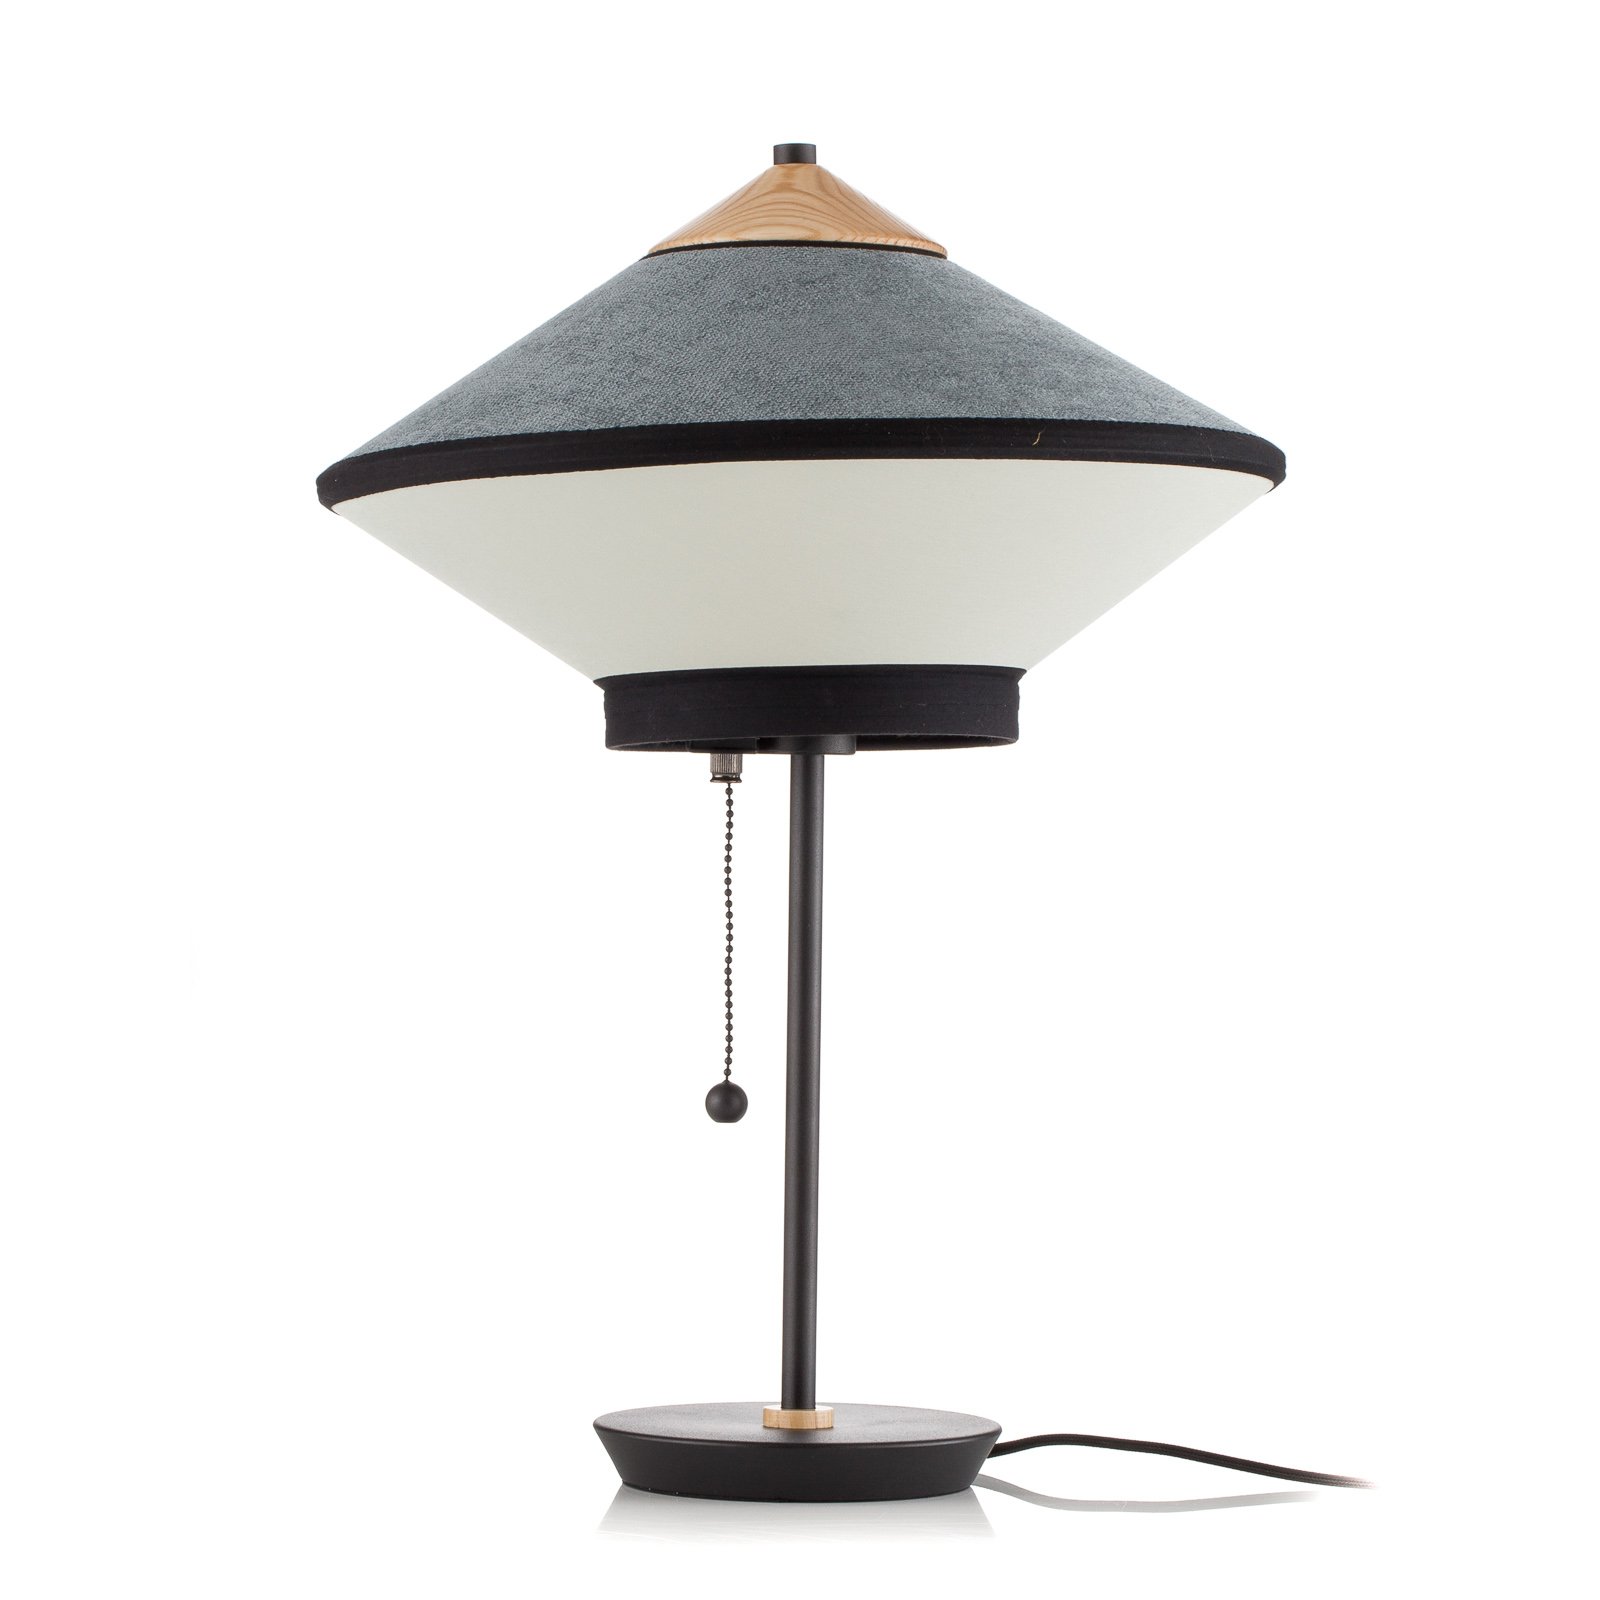 Forestier Cymbal S table lamp, Atlantic blue